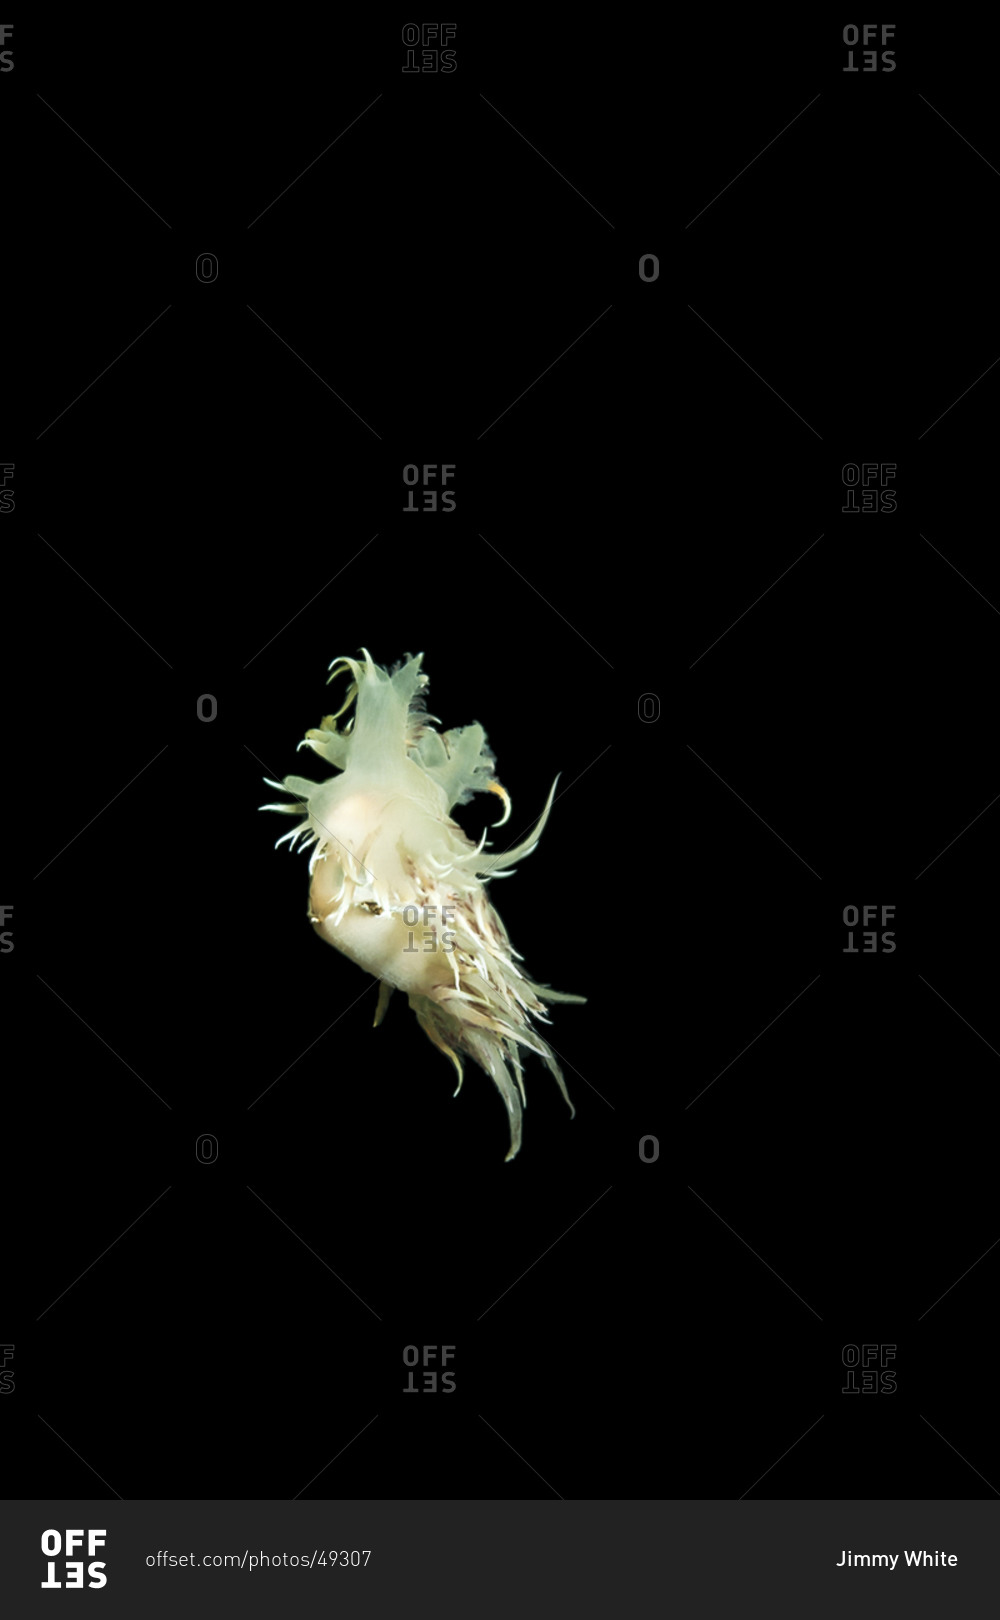 A Nudibranch mollusk floating in the depths of the ocean